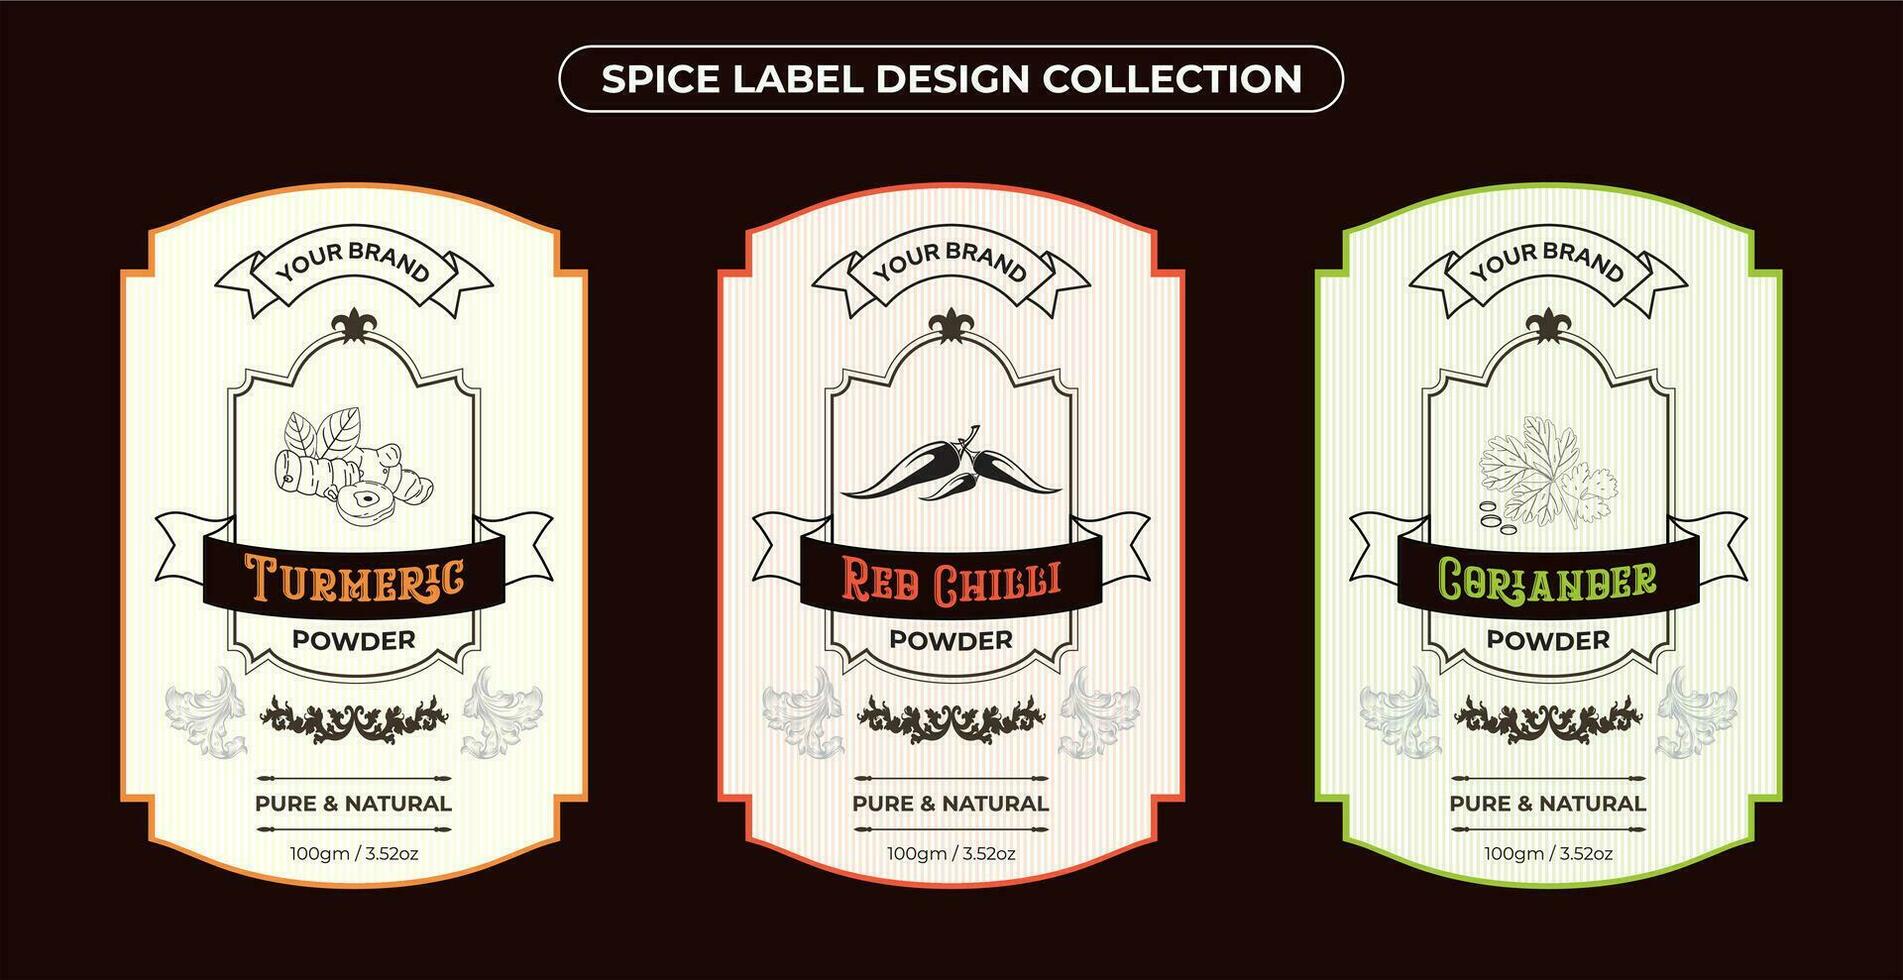 Set of vintage spice label design, vintage style, food, spices, Red Chilli Powder, Turmeric Powder, Coriander Powder. Pure and natural farm fresh, hand drawn vector illustration